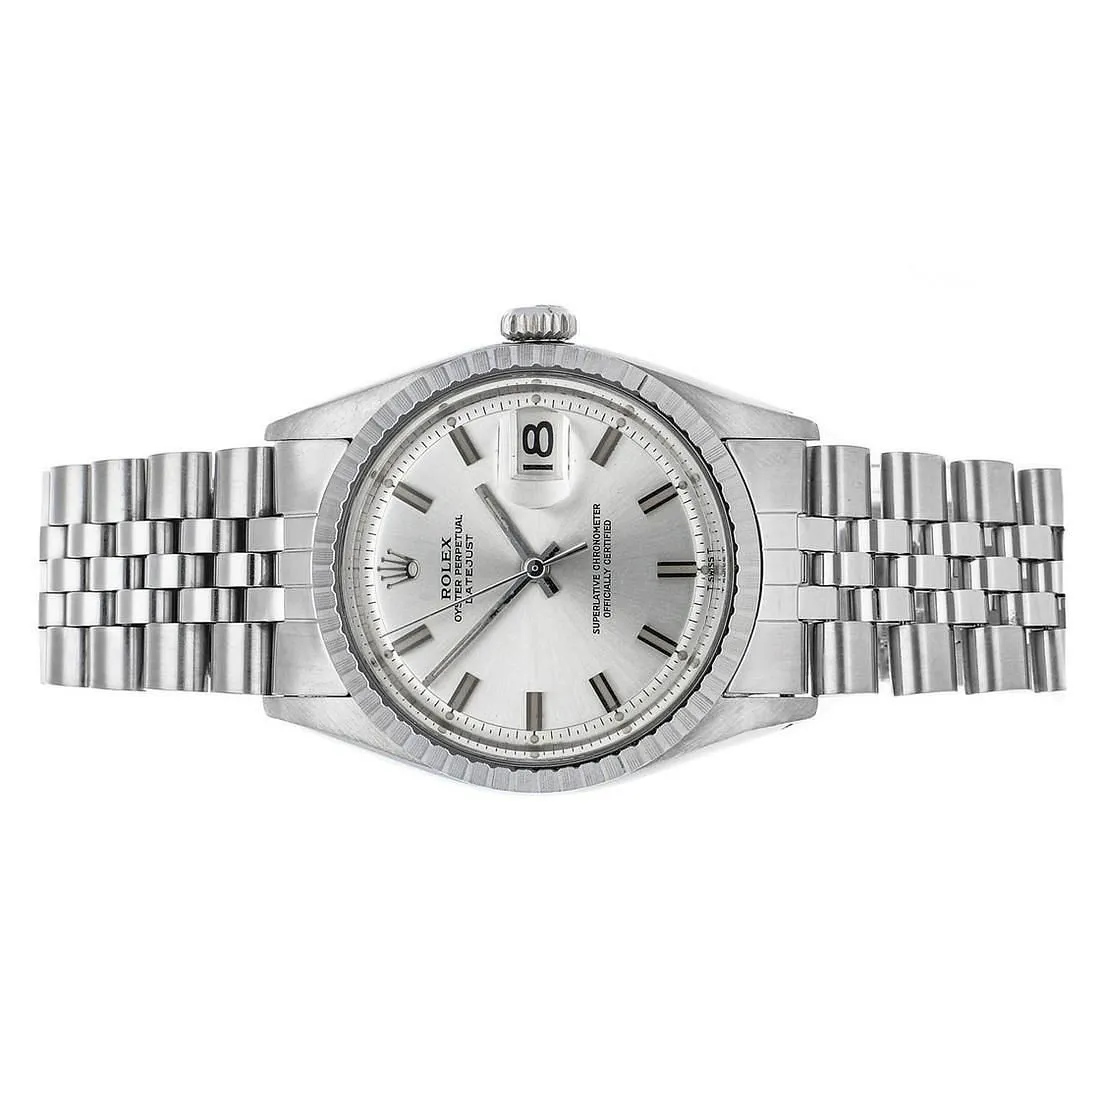 Rolex Datejust 1603 36mm Stainless steel Silver 4